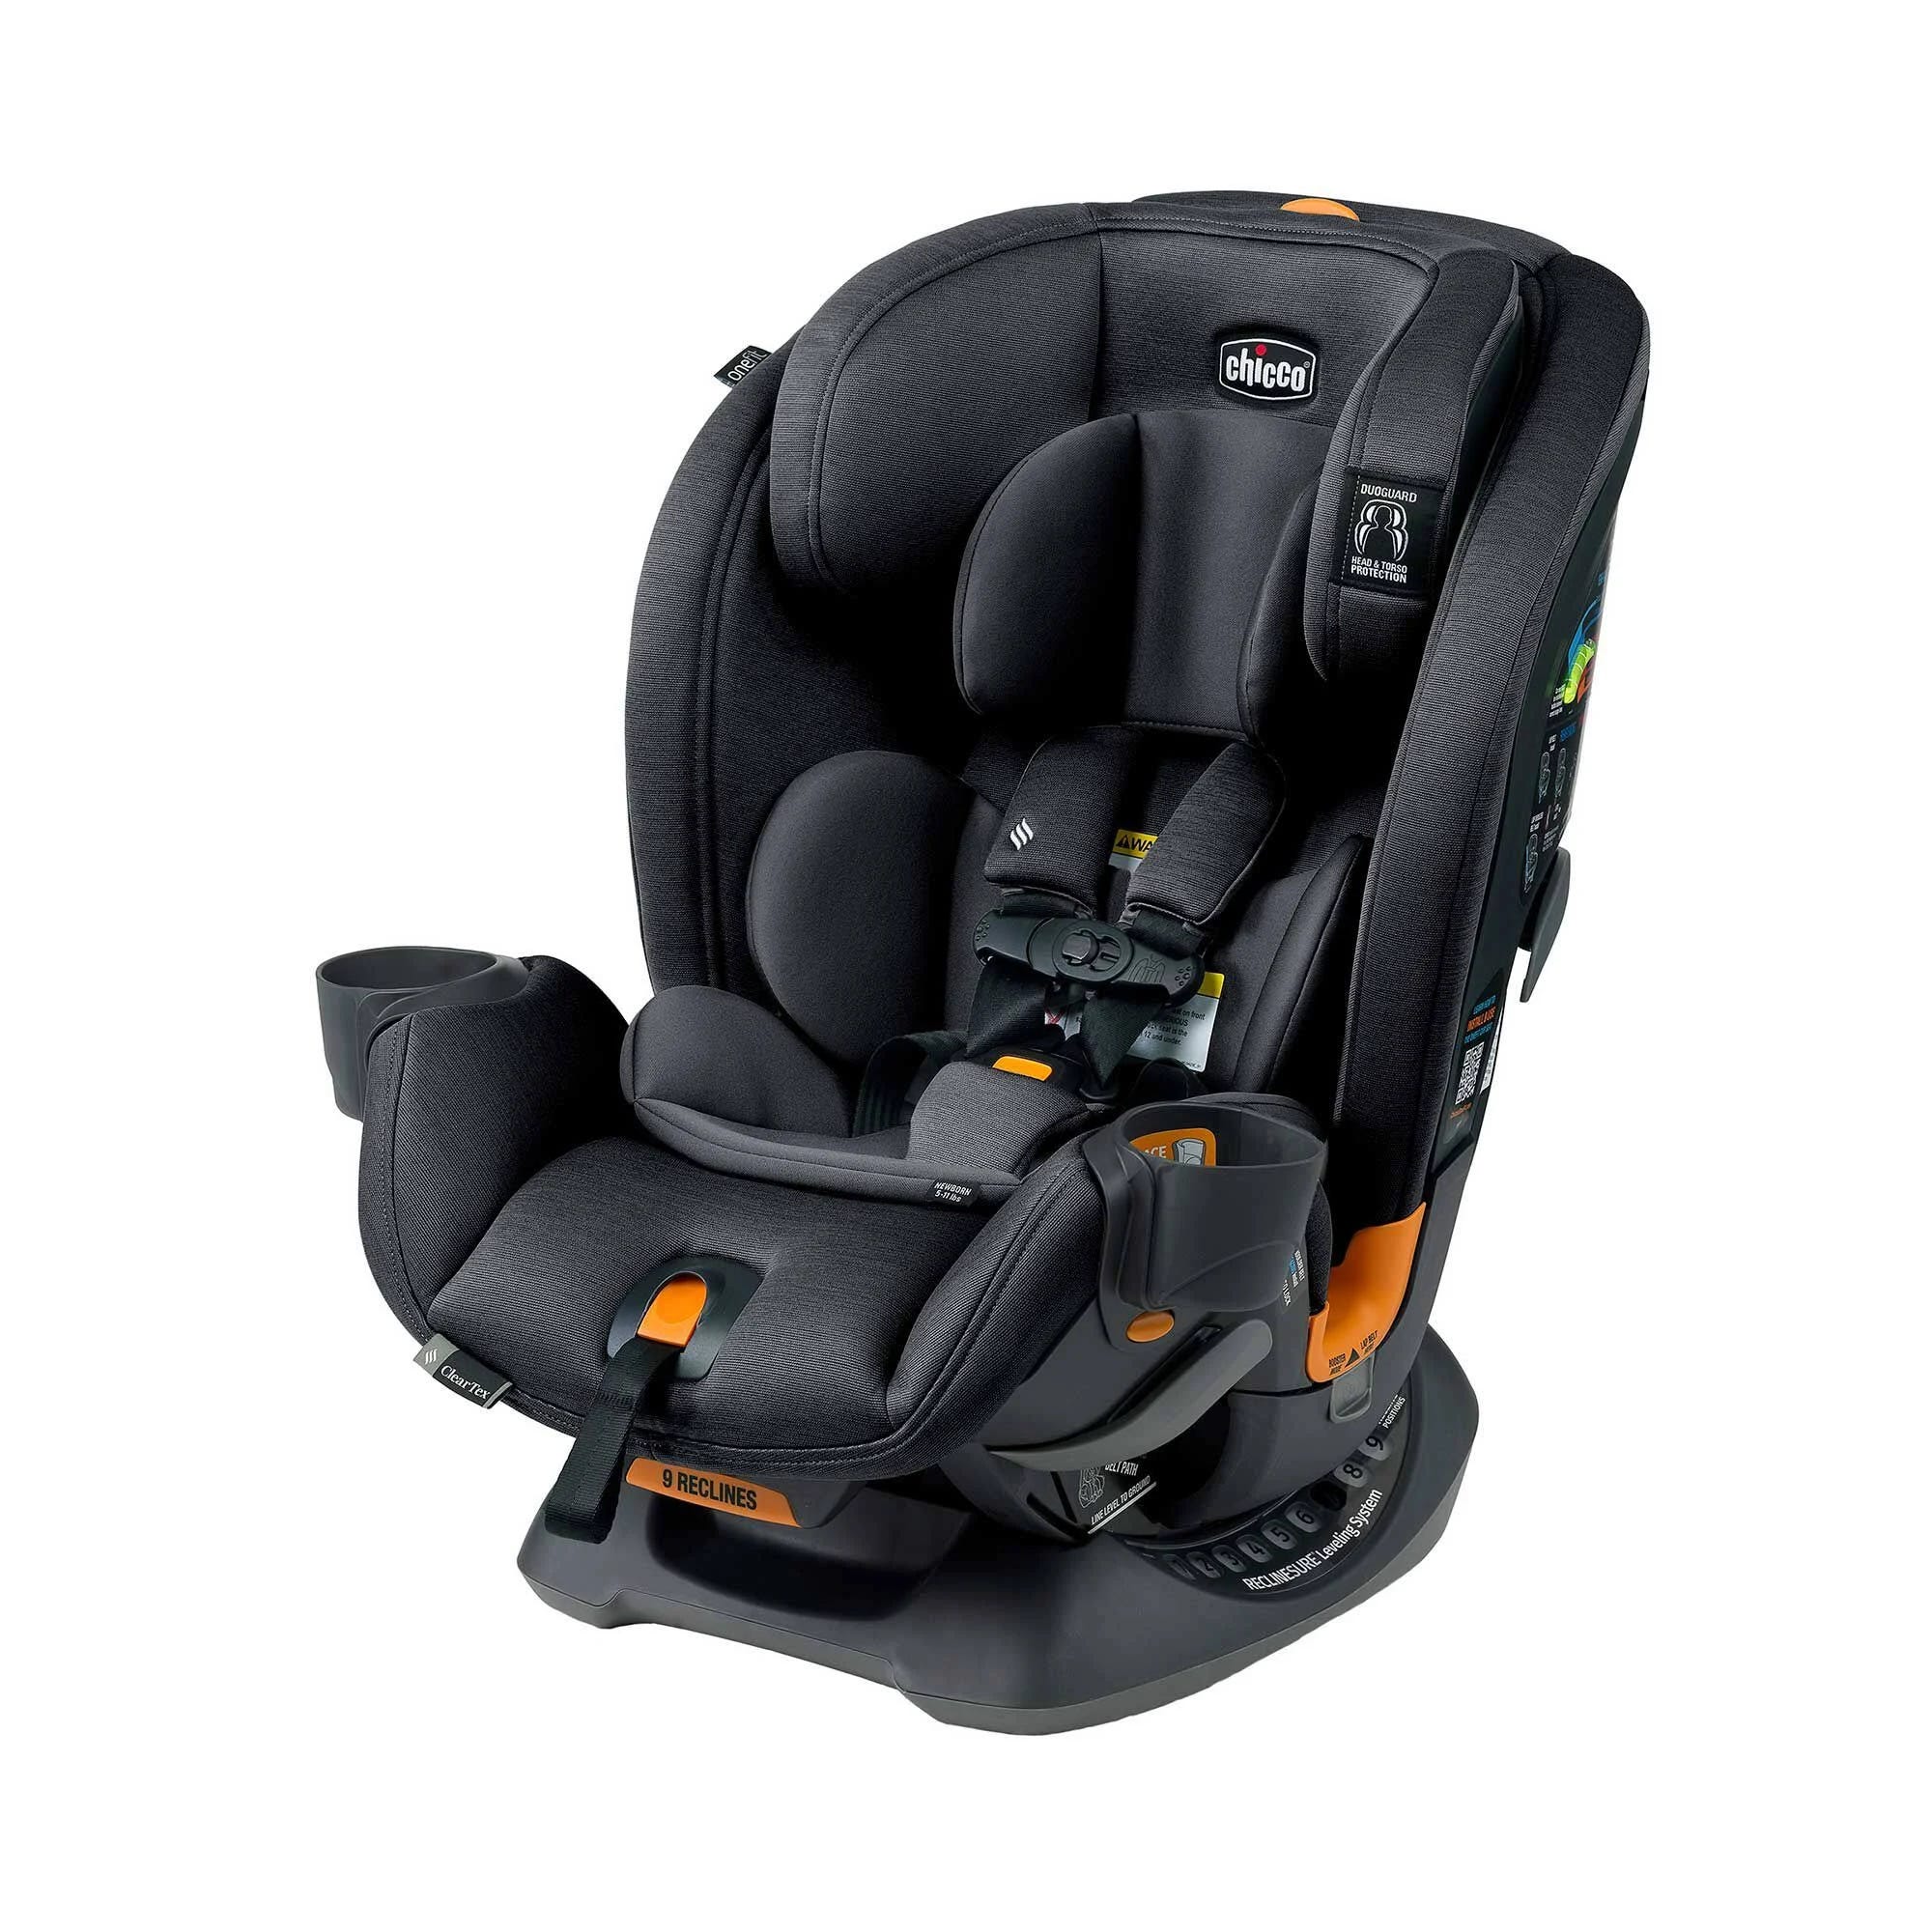 All-in-One Car Seat for Growing Kids: Chicco OneFit Cleartex | Image